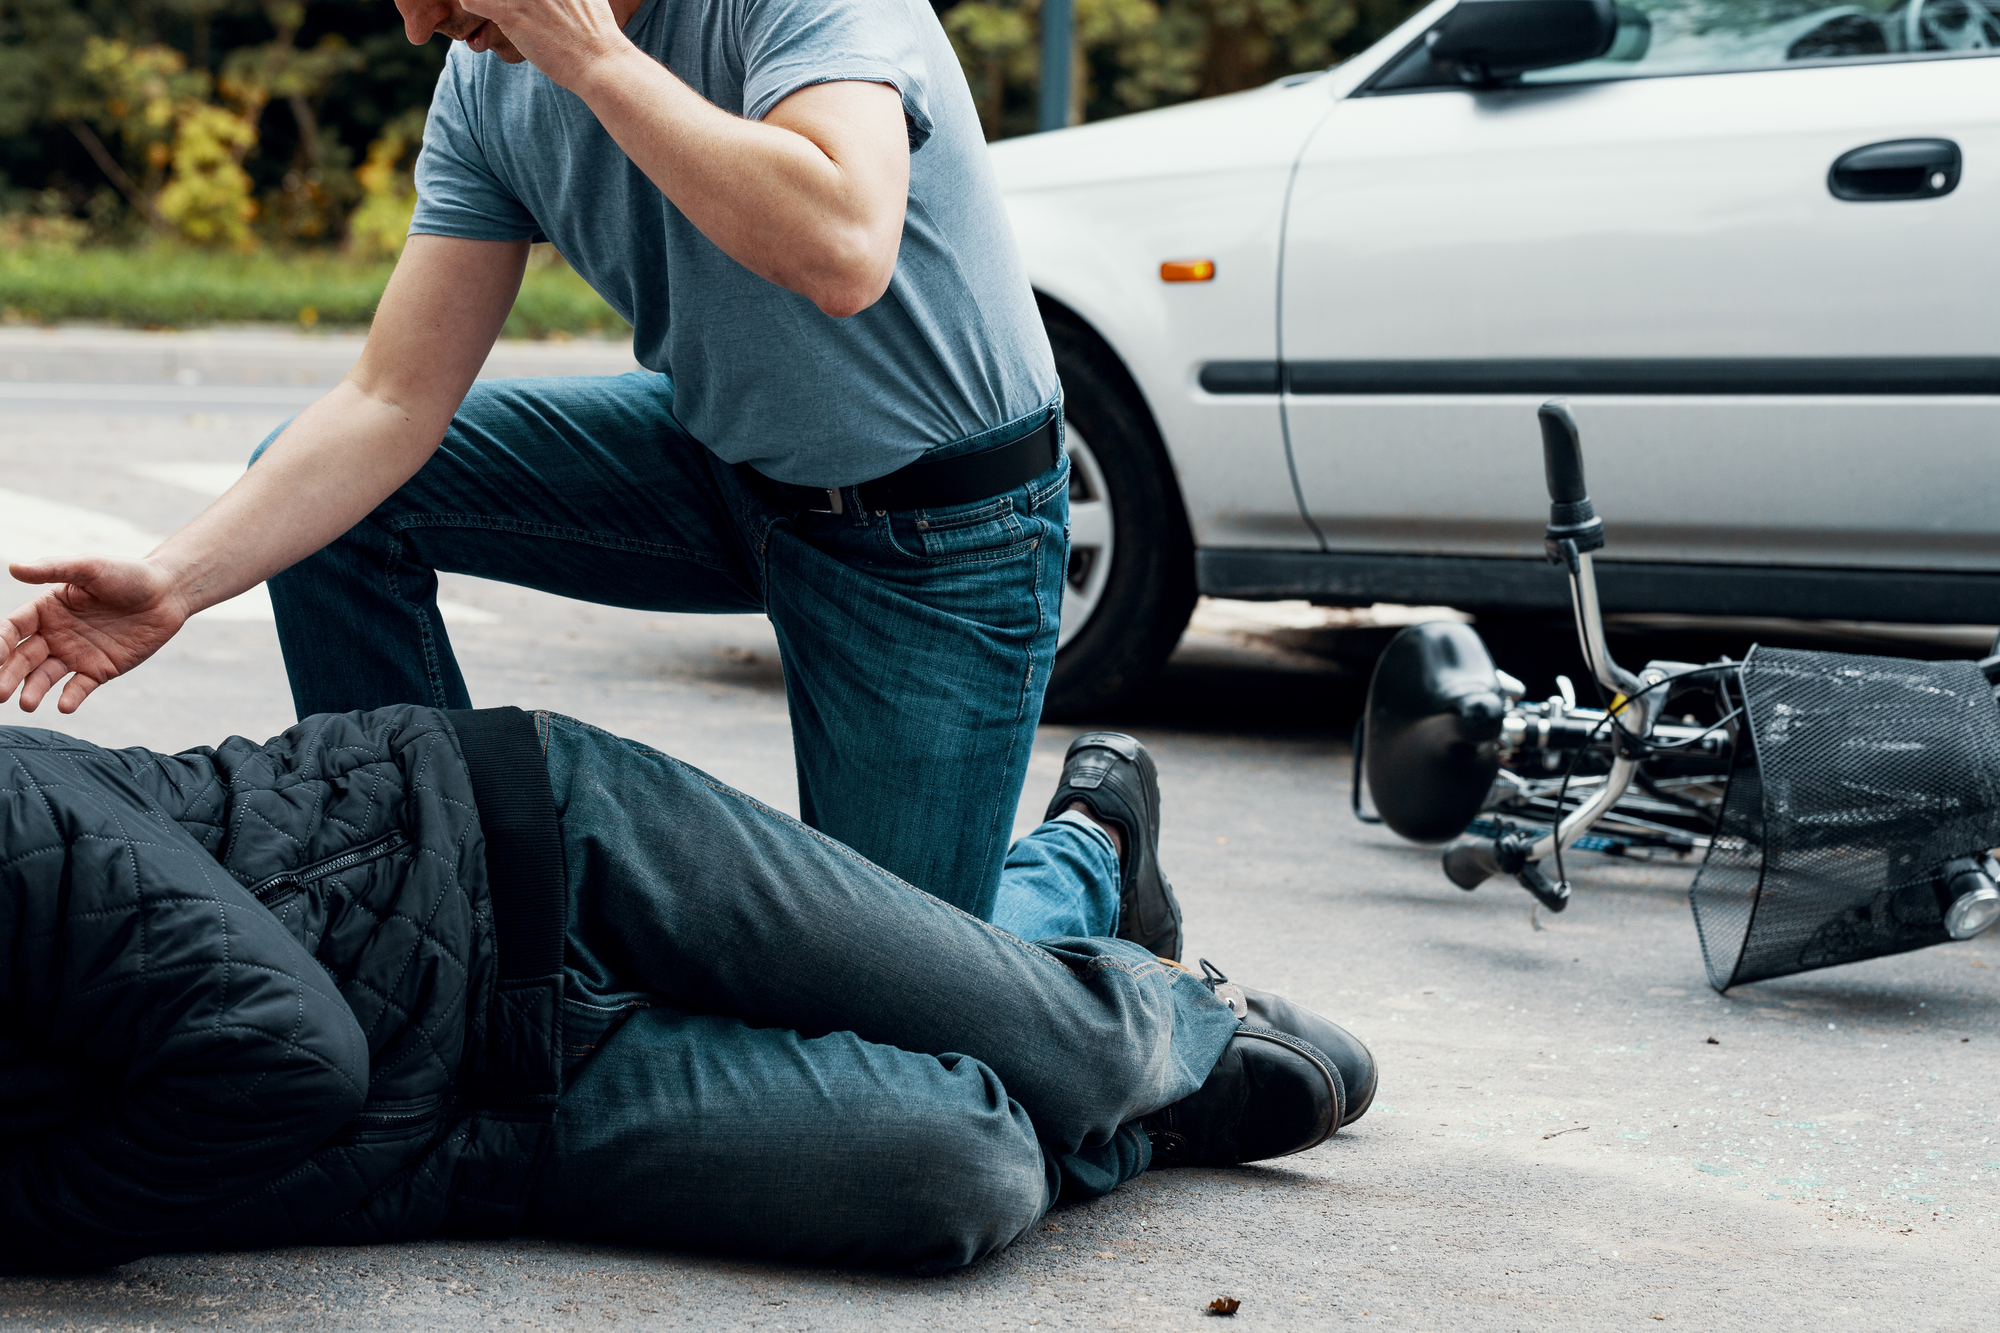 A personal injury lawyer in Tampa will look at any breaches of duty of care